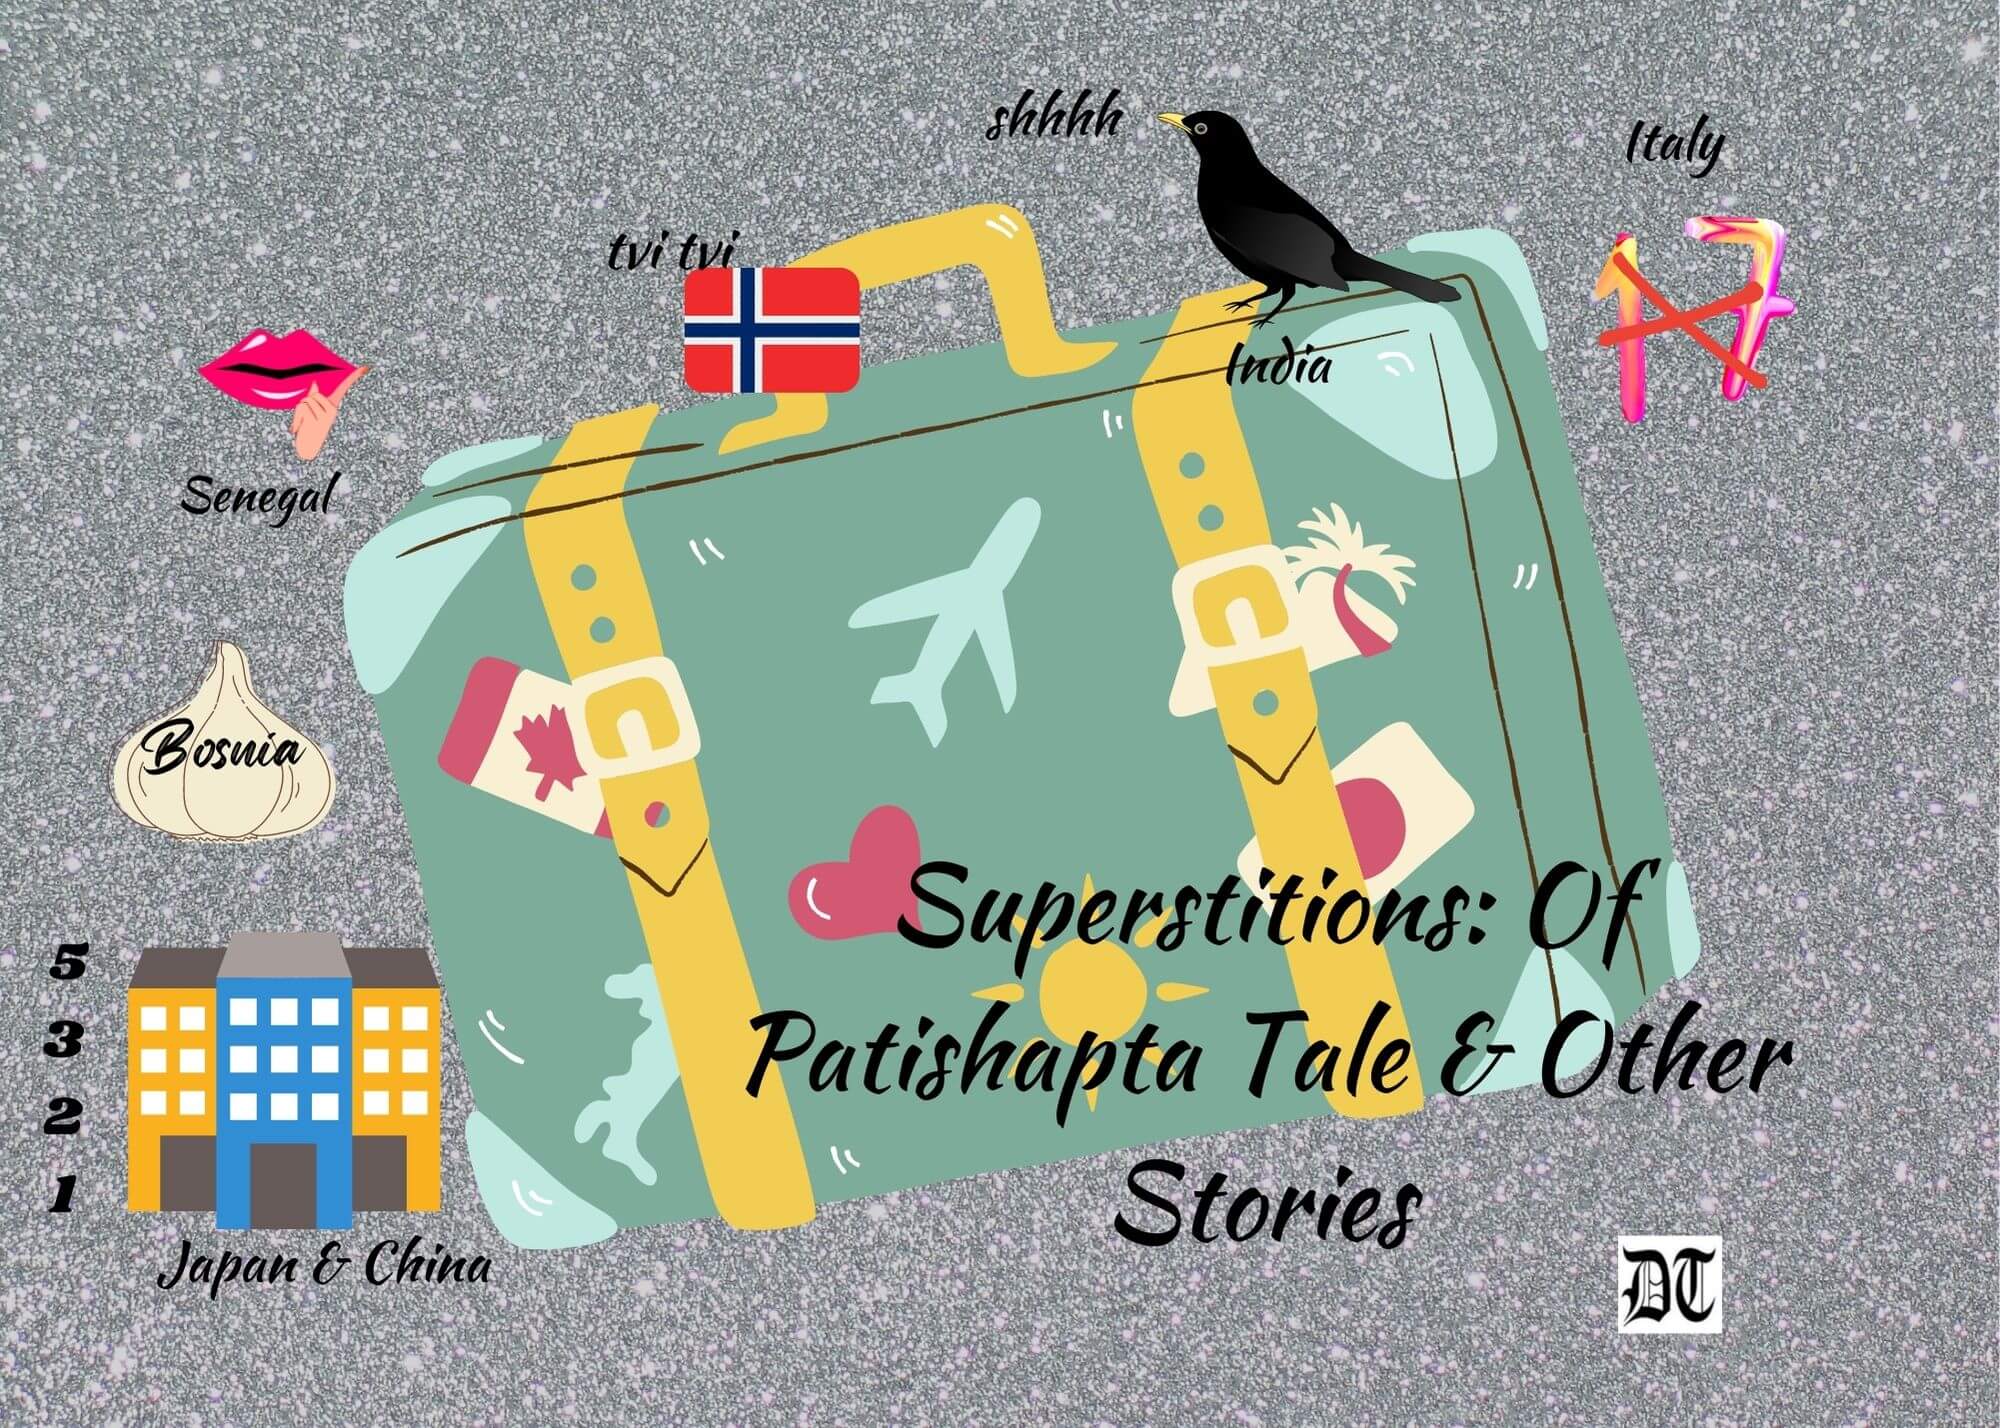 Superstitions: Of Patishapta Tale & Other Stories - Different Truths